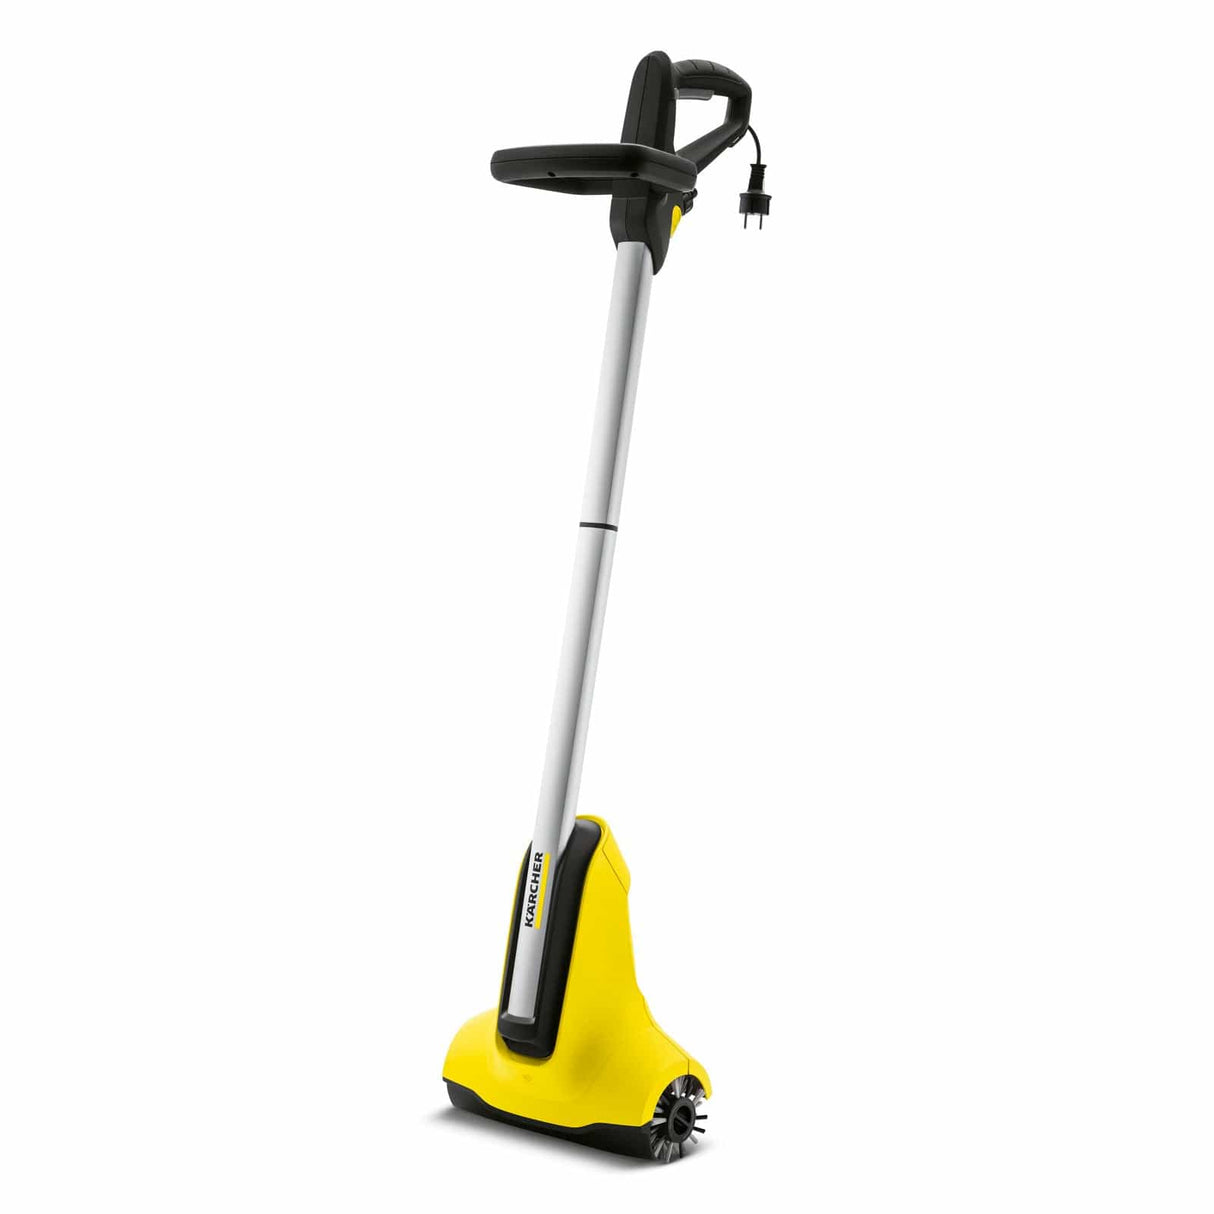 Karcher Pressure Washer Karcher Surface Cleaner Pcl 4 Patio Cleaner